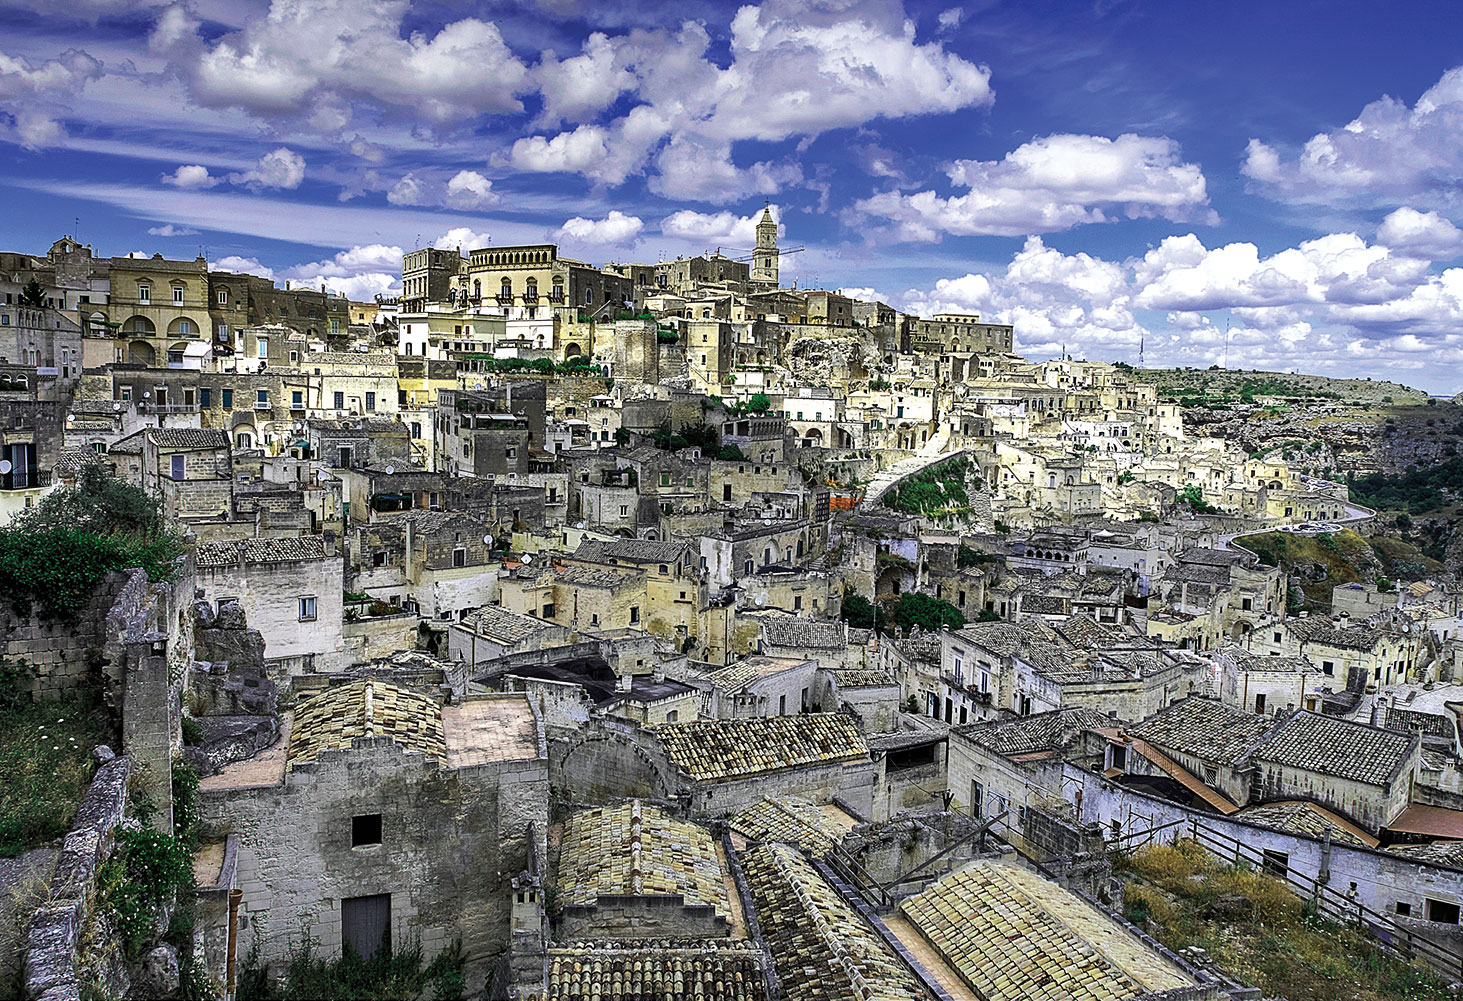 First Place: Jon Williams - The Ancient Italian City of Matera